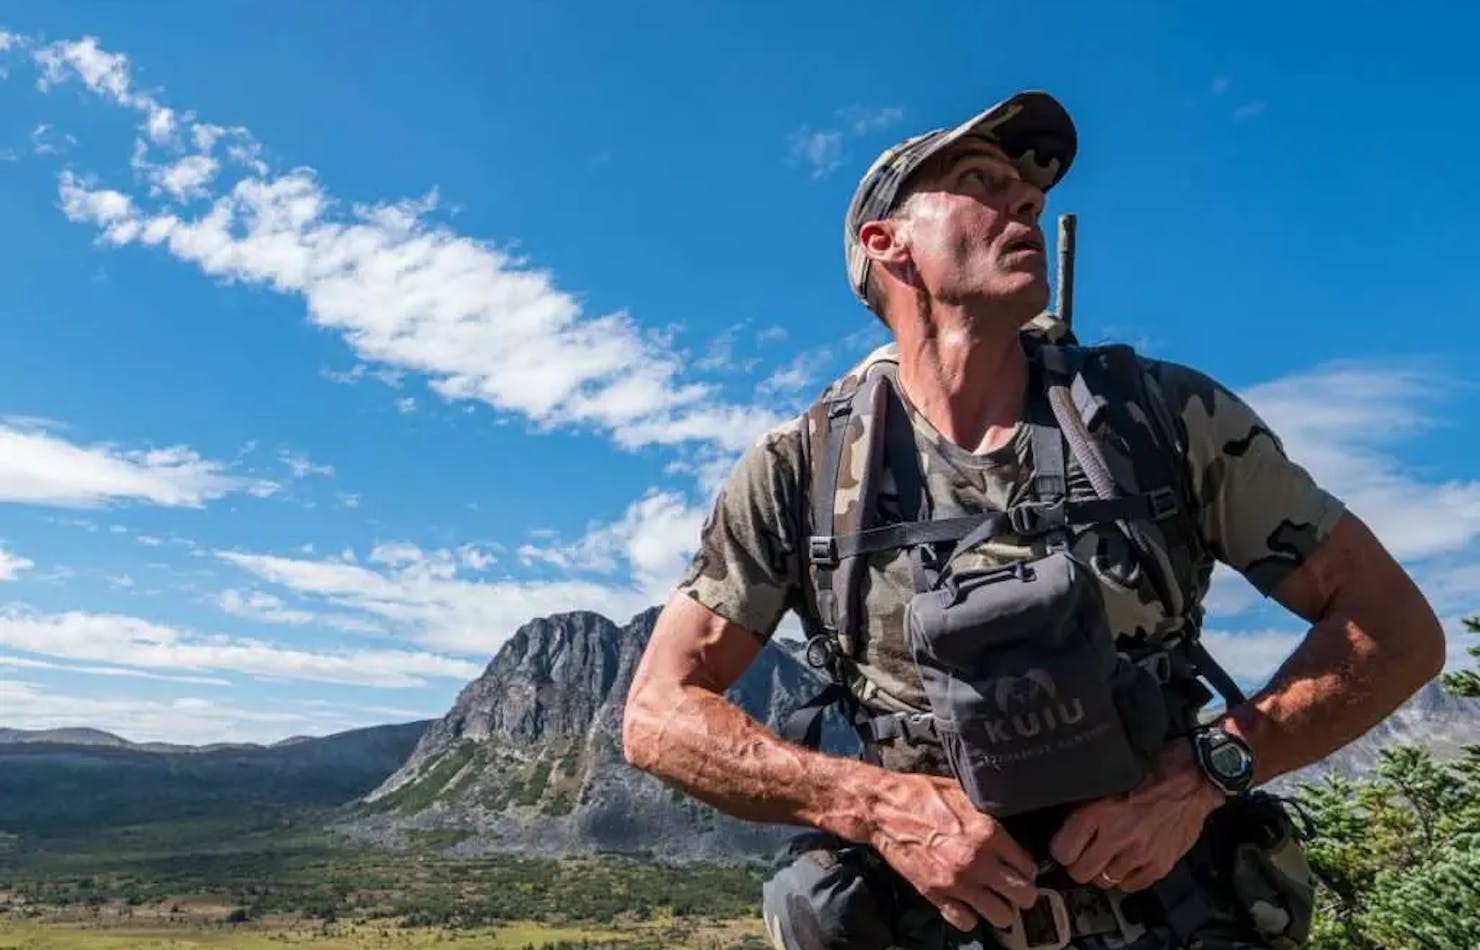 Silvercore Podcast Ep. 133: Family, Flying, and Hunting: Greg McHale's Yukon Adventures